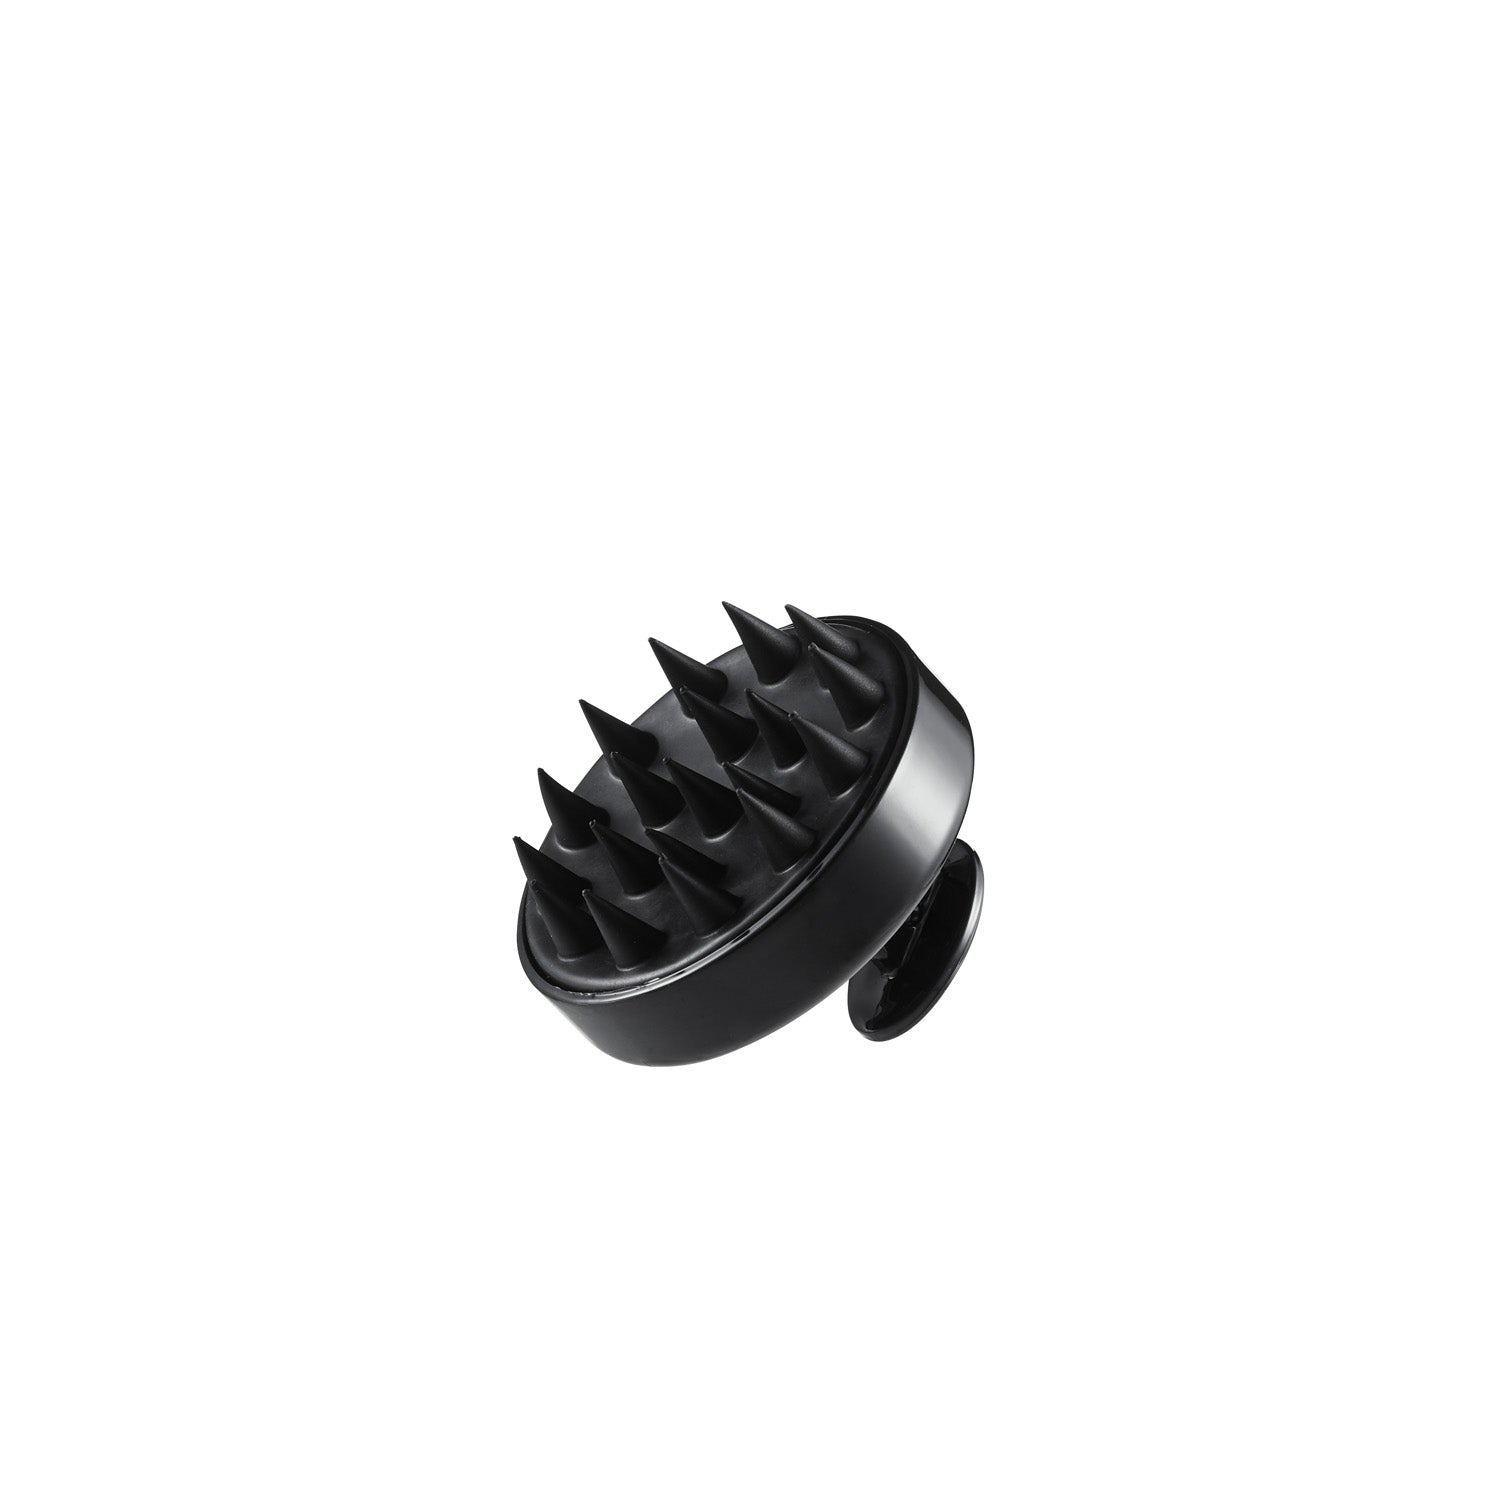 How to use the shampoo brush or scalp brush for hair growth?